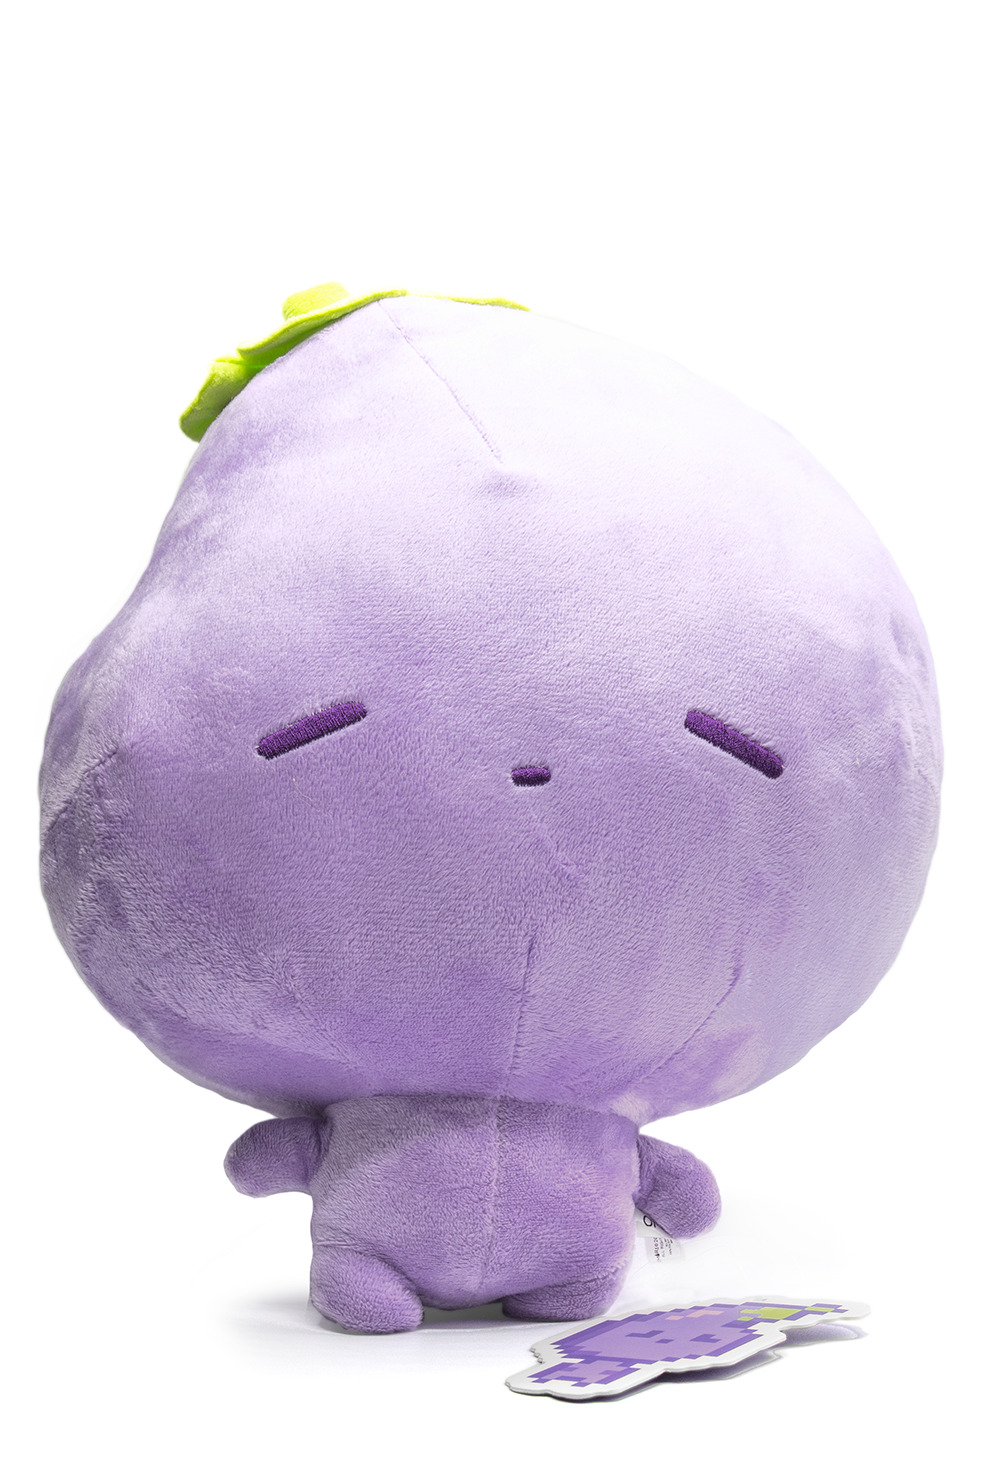 OMOCAT · OMORI plushies are now available!